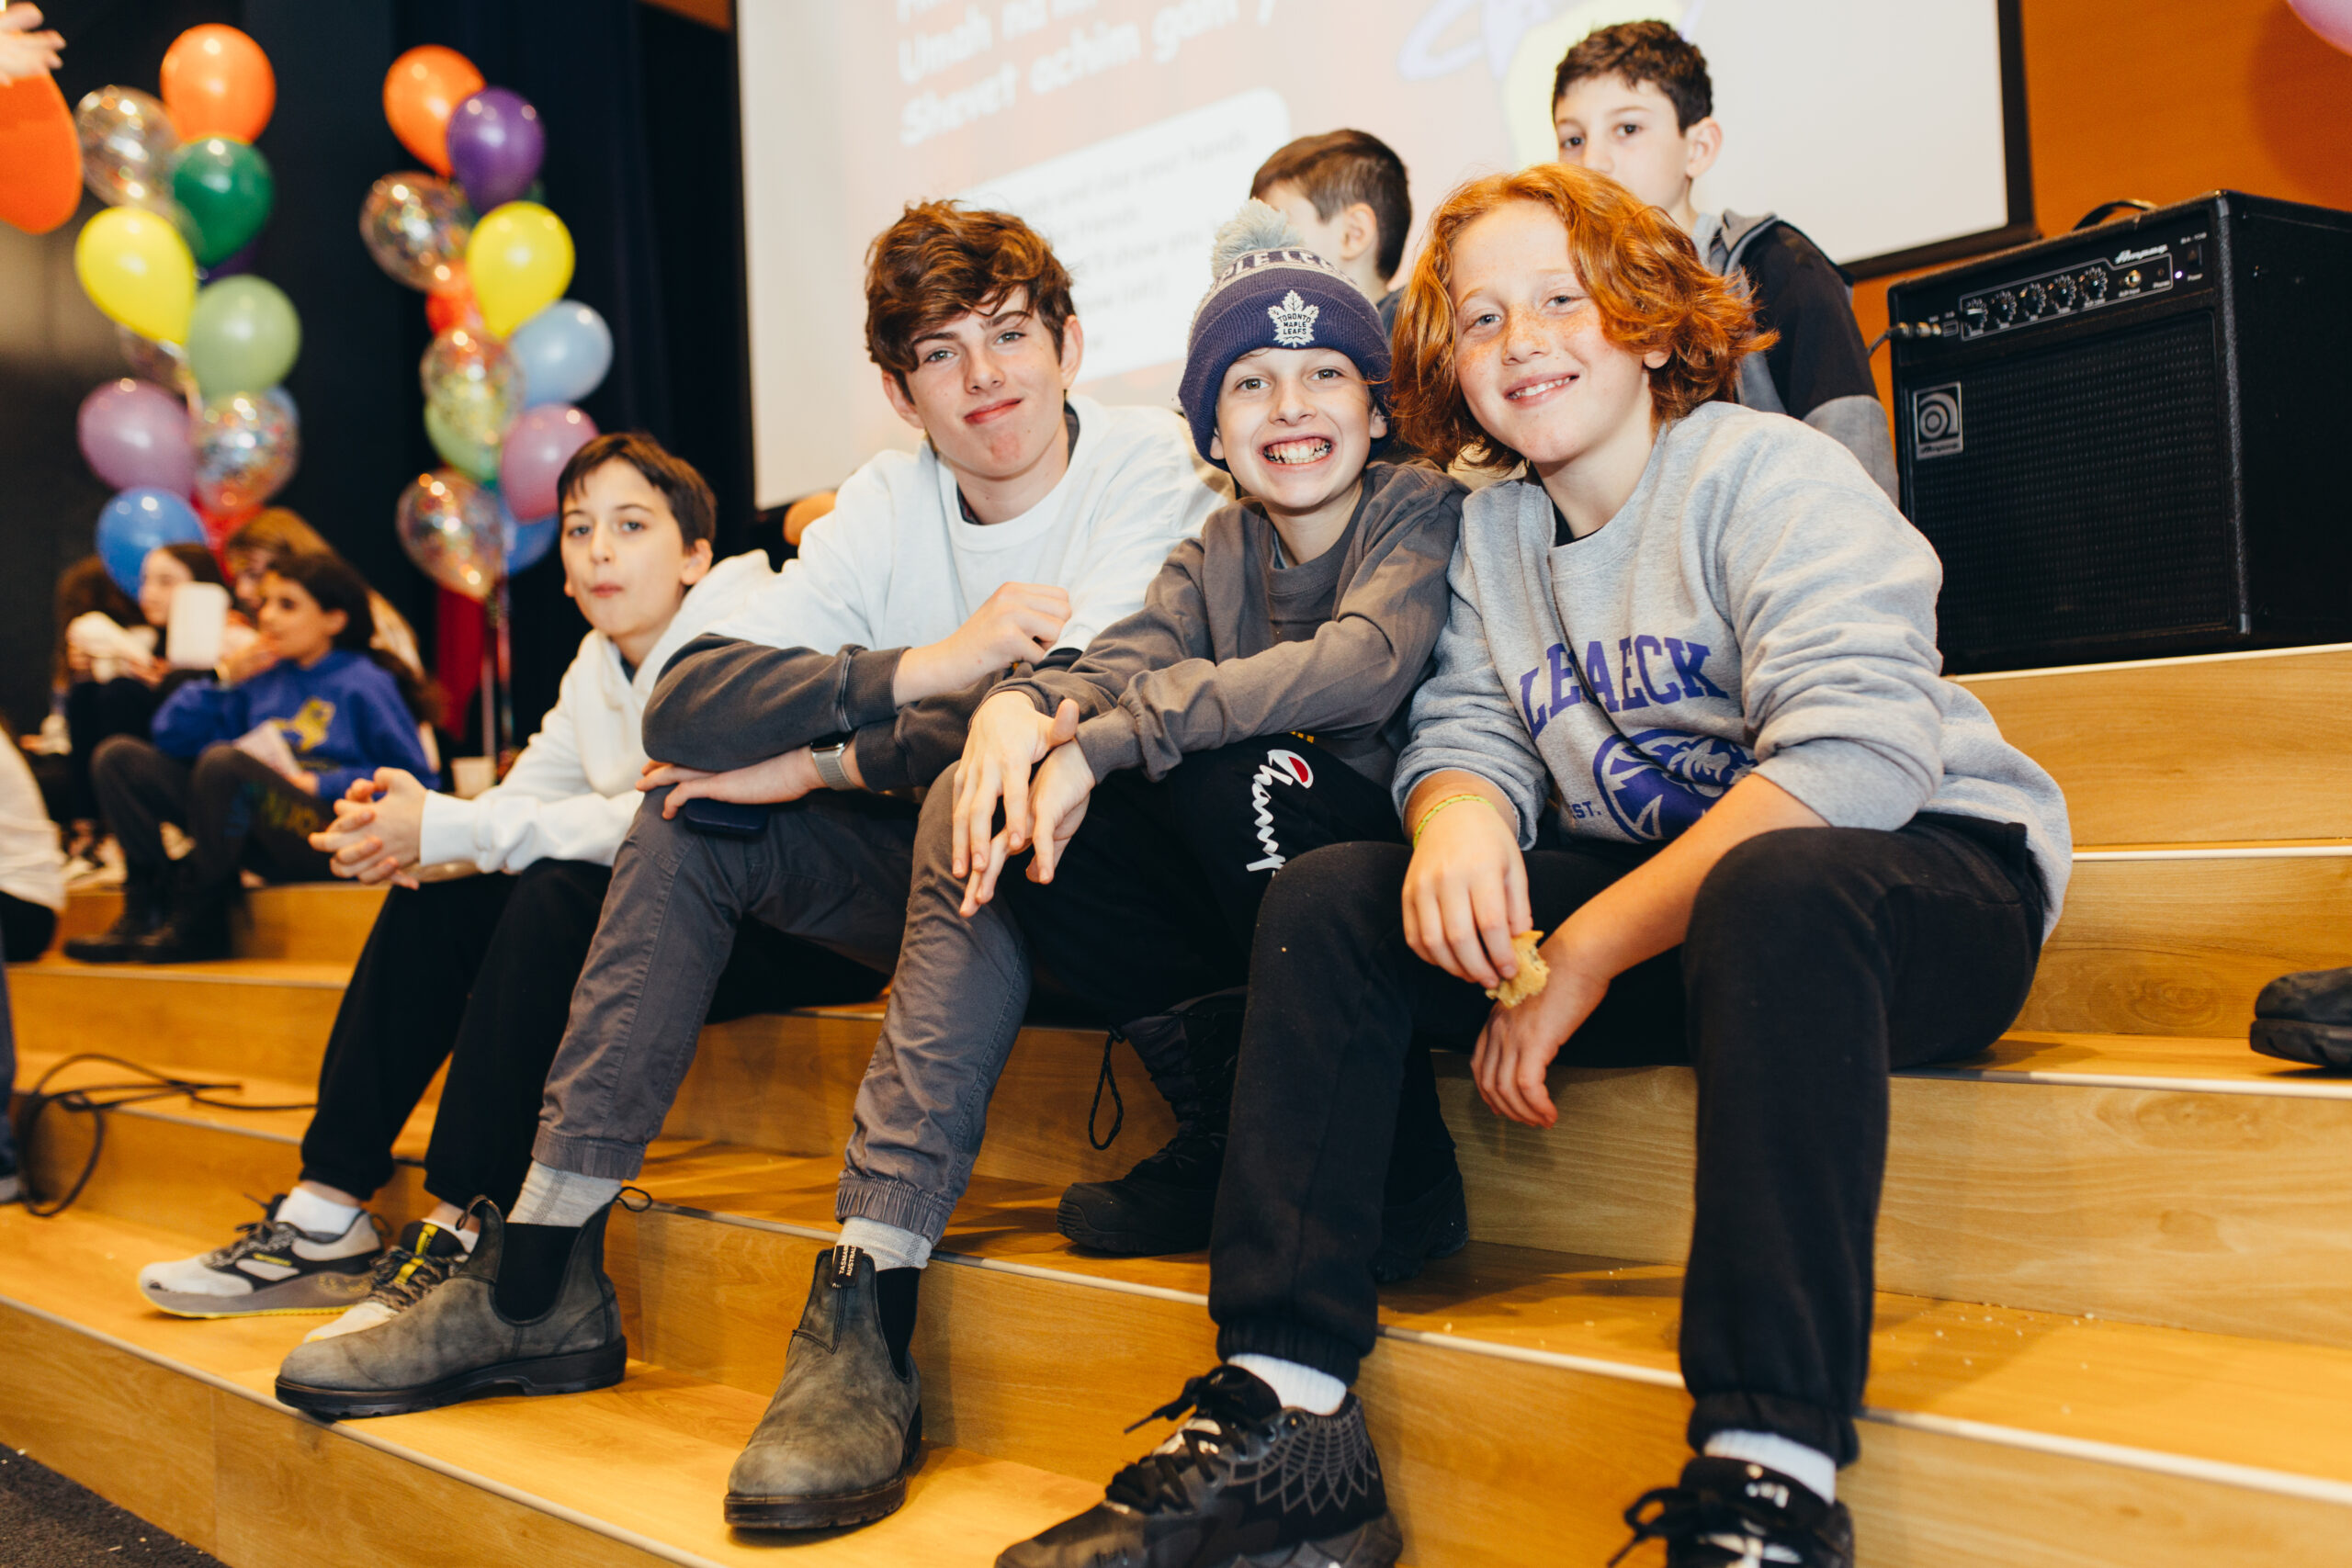 A group of students sitting on a stage at an event. There are balloons and a large screen in the background. The children are smiling naturally.